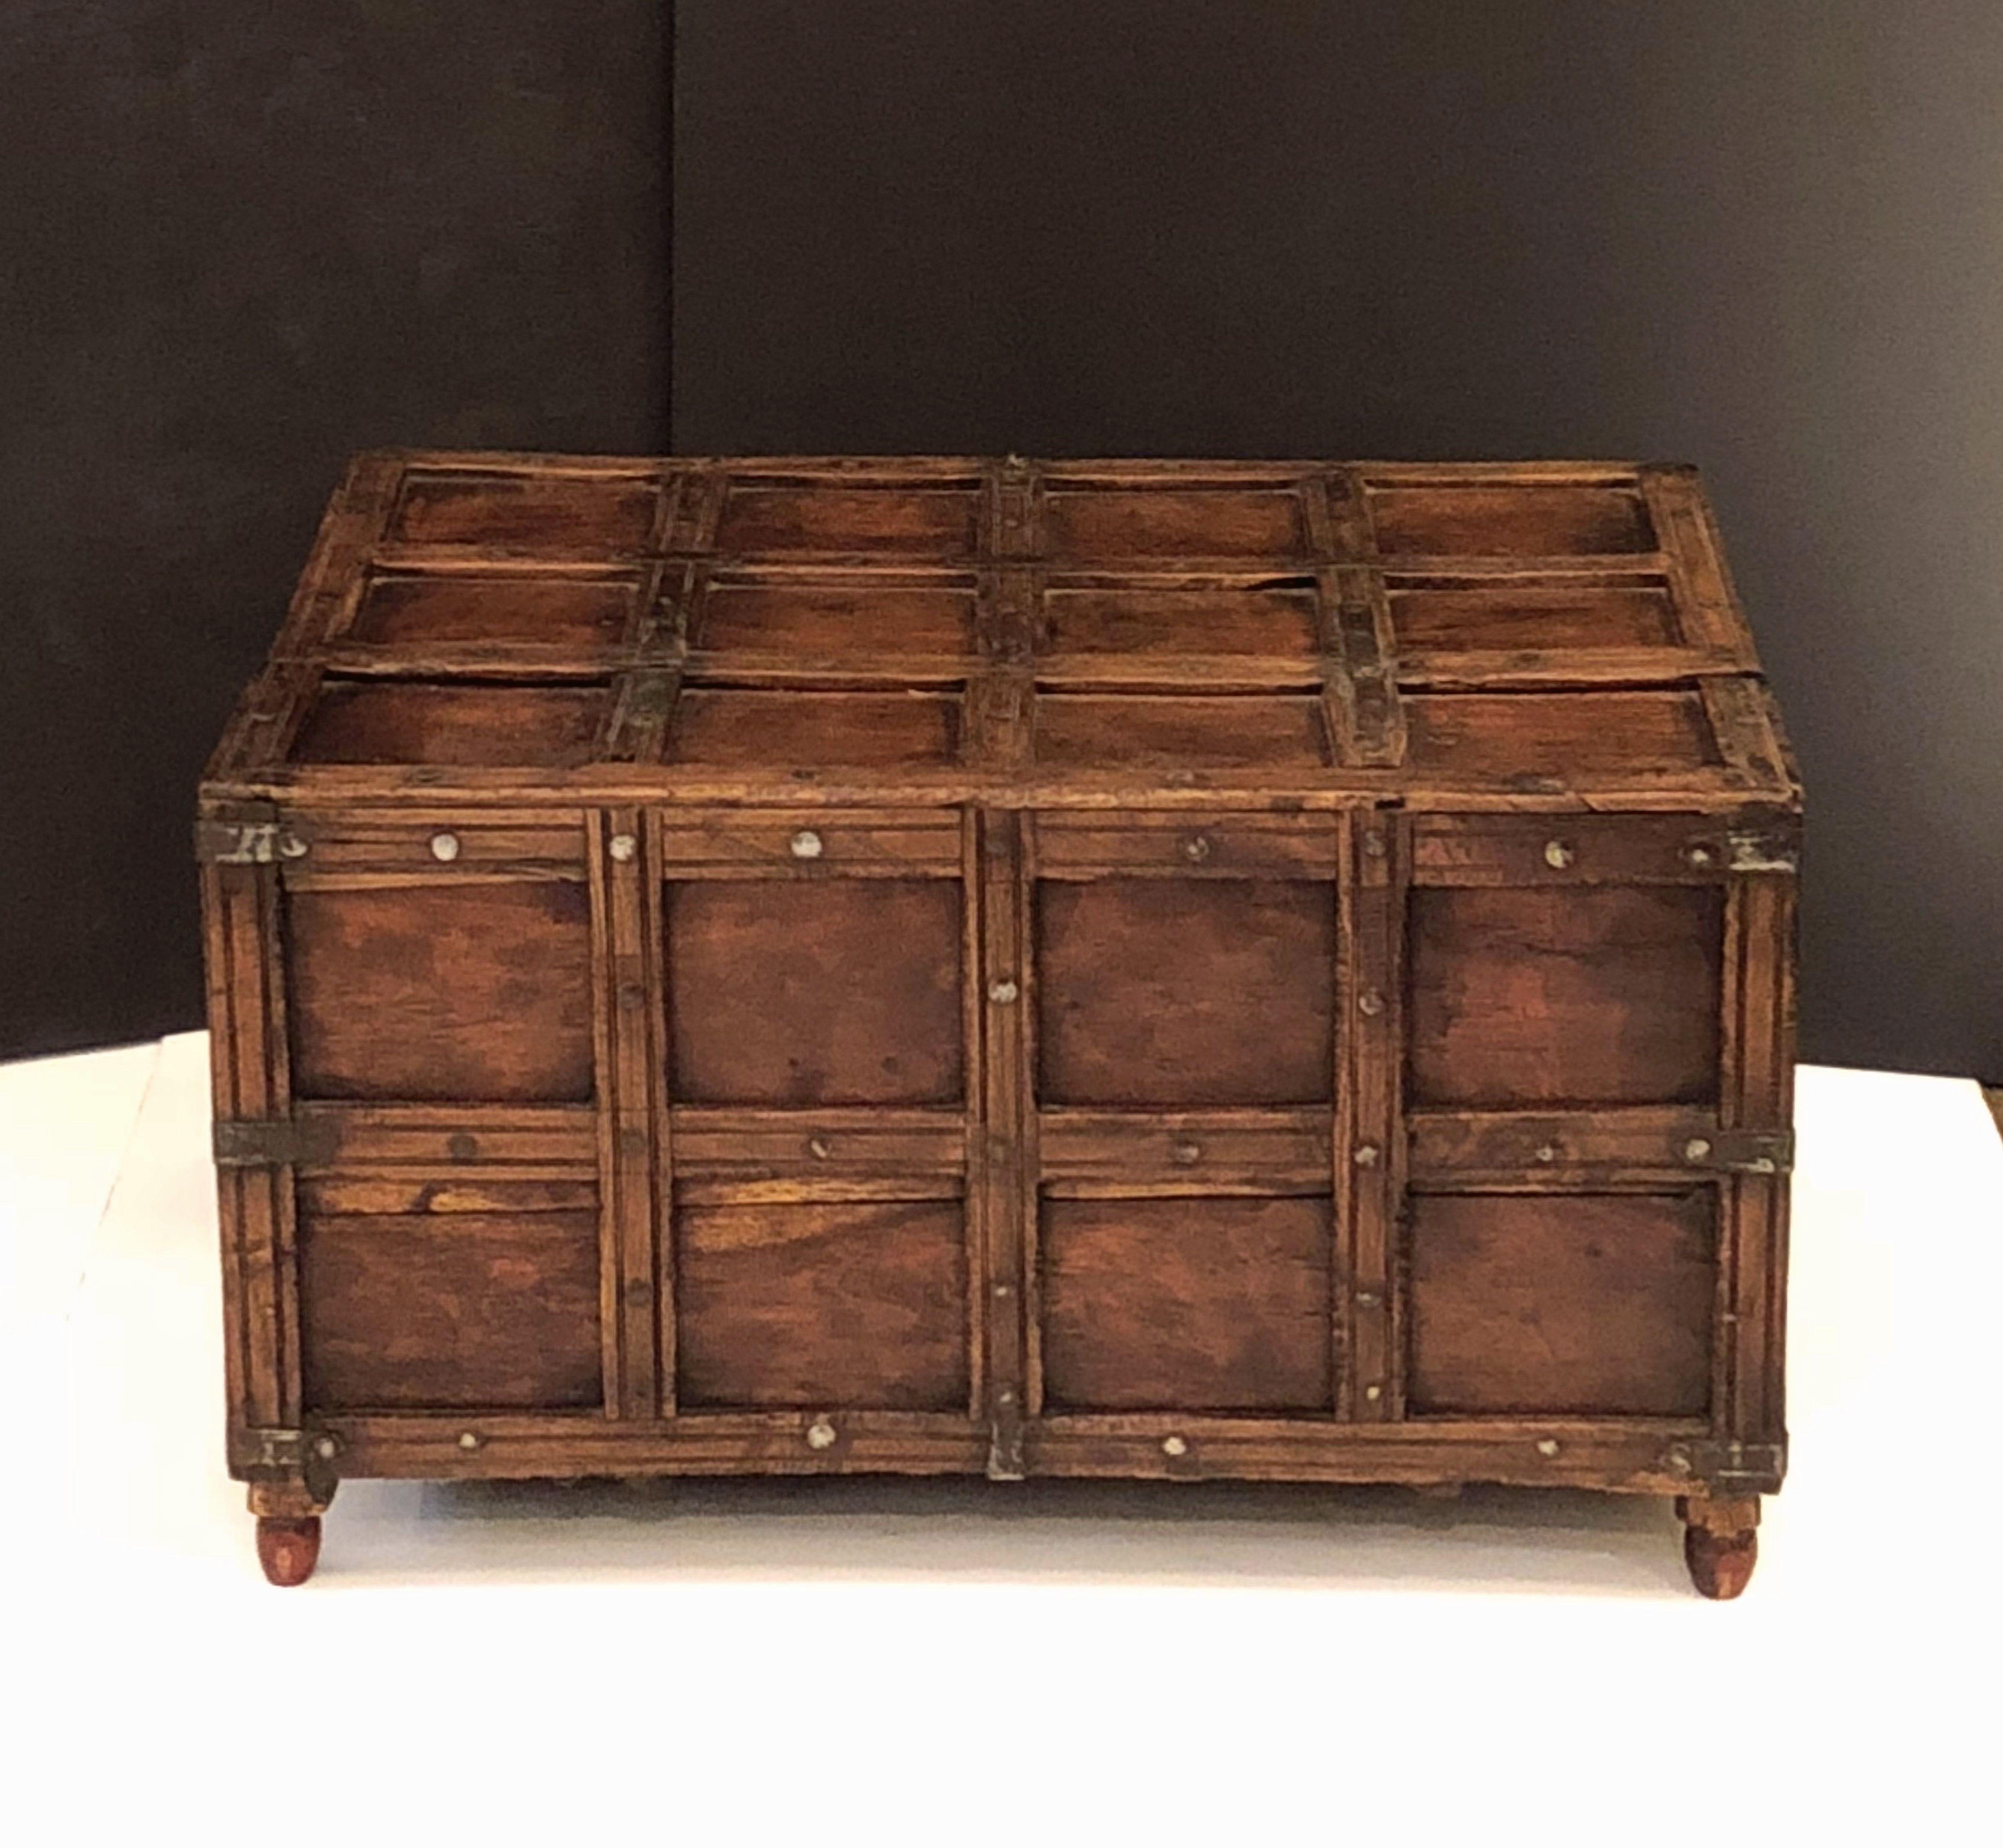 Iron-Bound Stick Box or Trunk from British Colonial India 'The Raj' 1